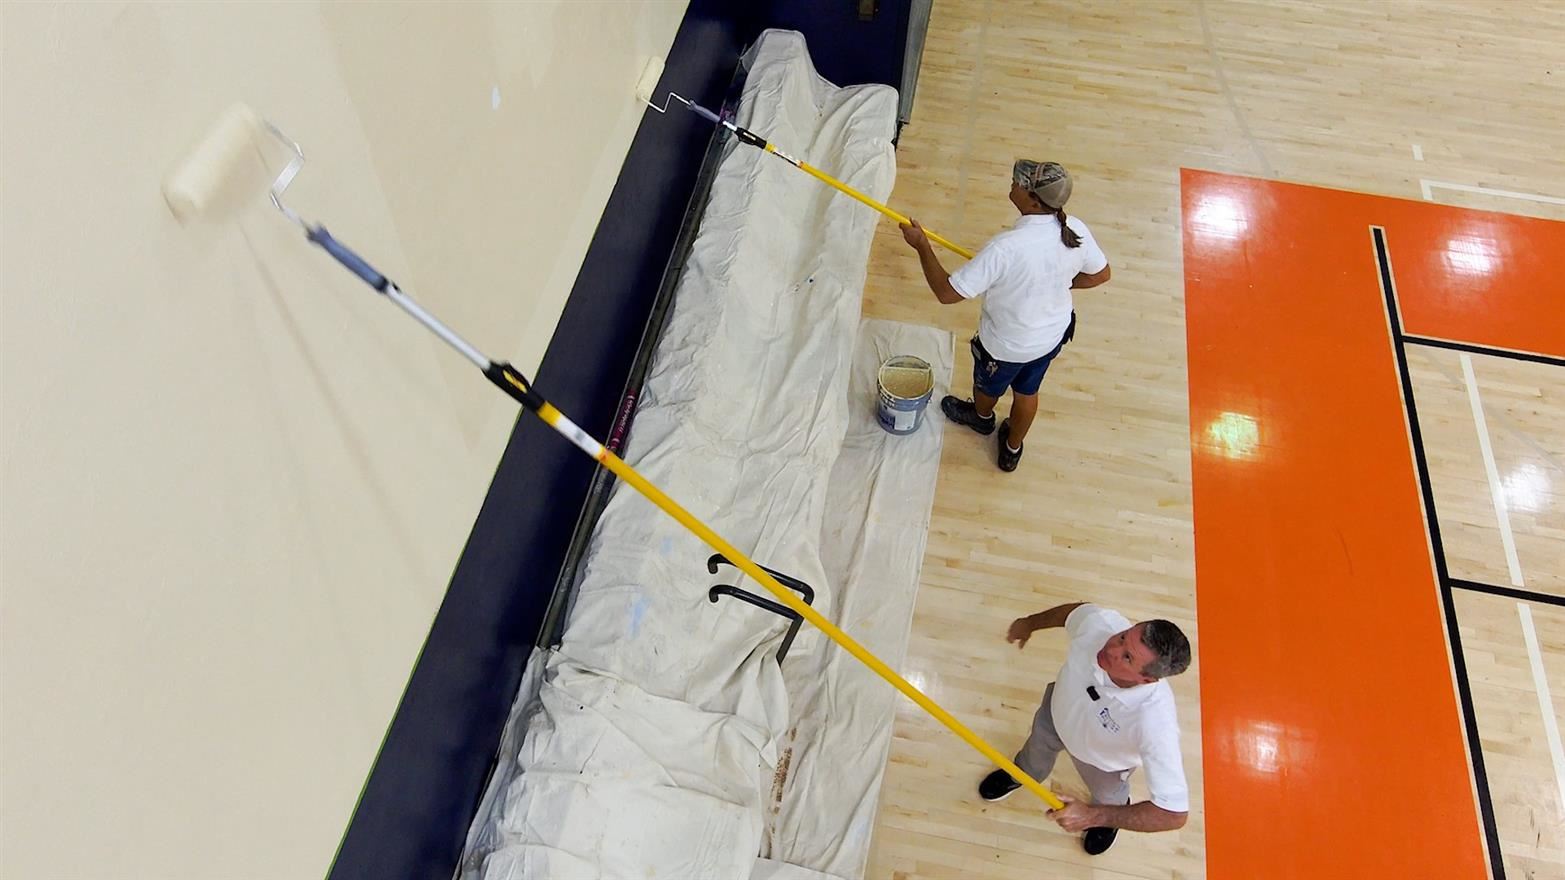  Burke painting a Gym